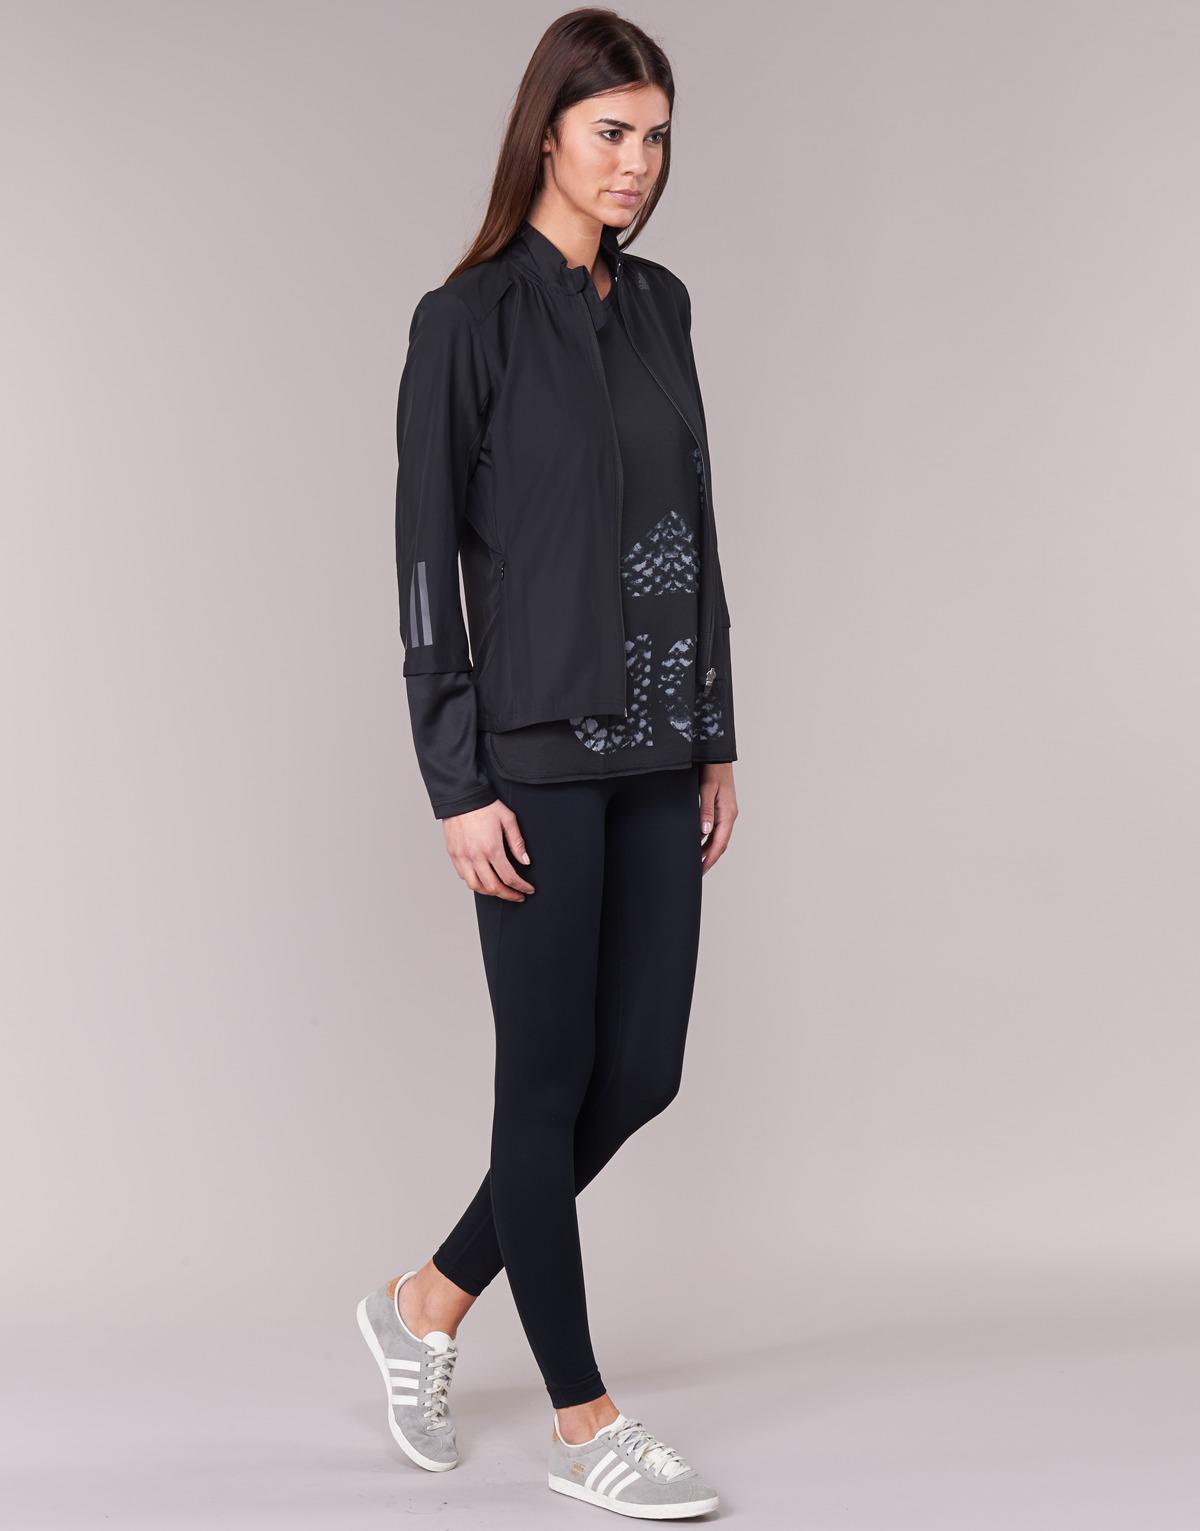 adidas Rs Wind Jkt W Tracksuit Jacket in Black - Lyst